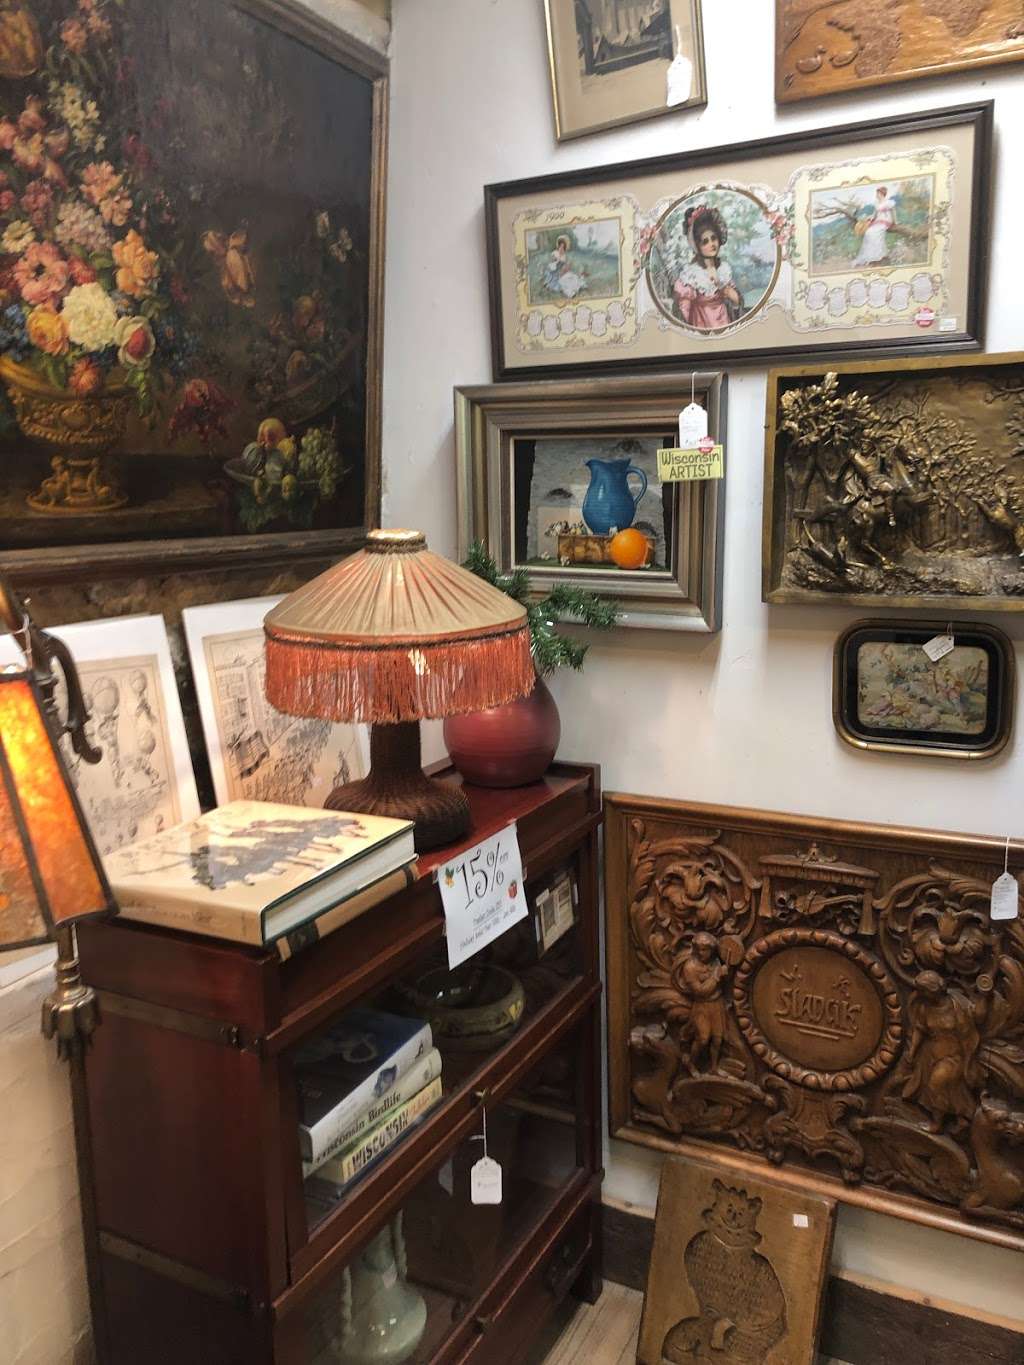 Antique Center At Wales | Photo 8 of 10 | Address: 323 E Summit Ave, Wales, WI 53183, USA | Phone: (262) 968-4913